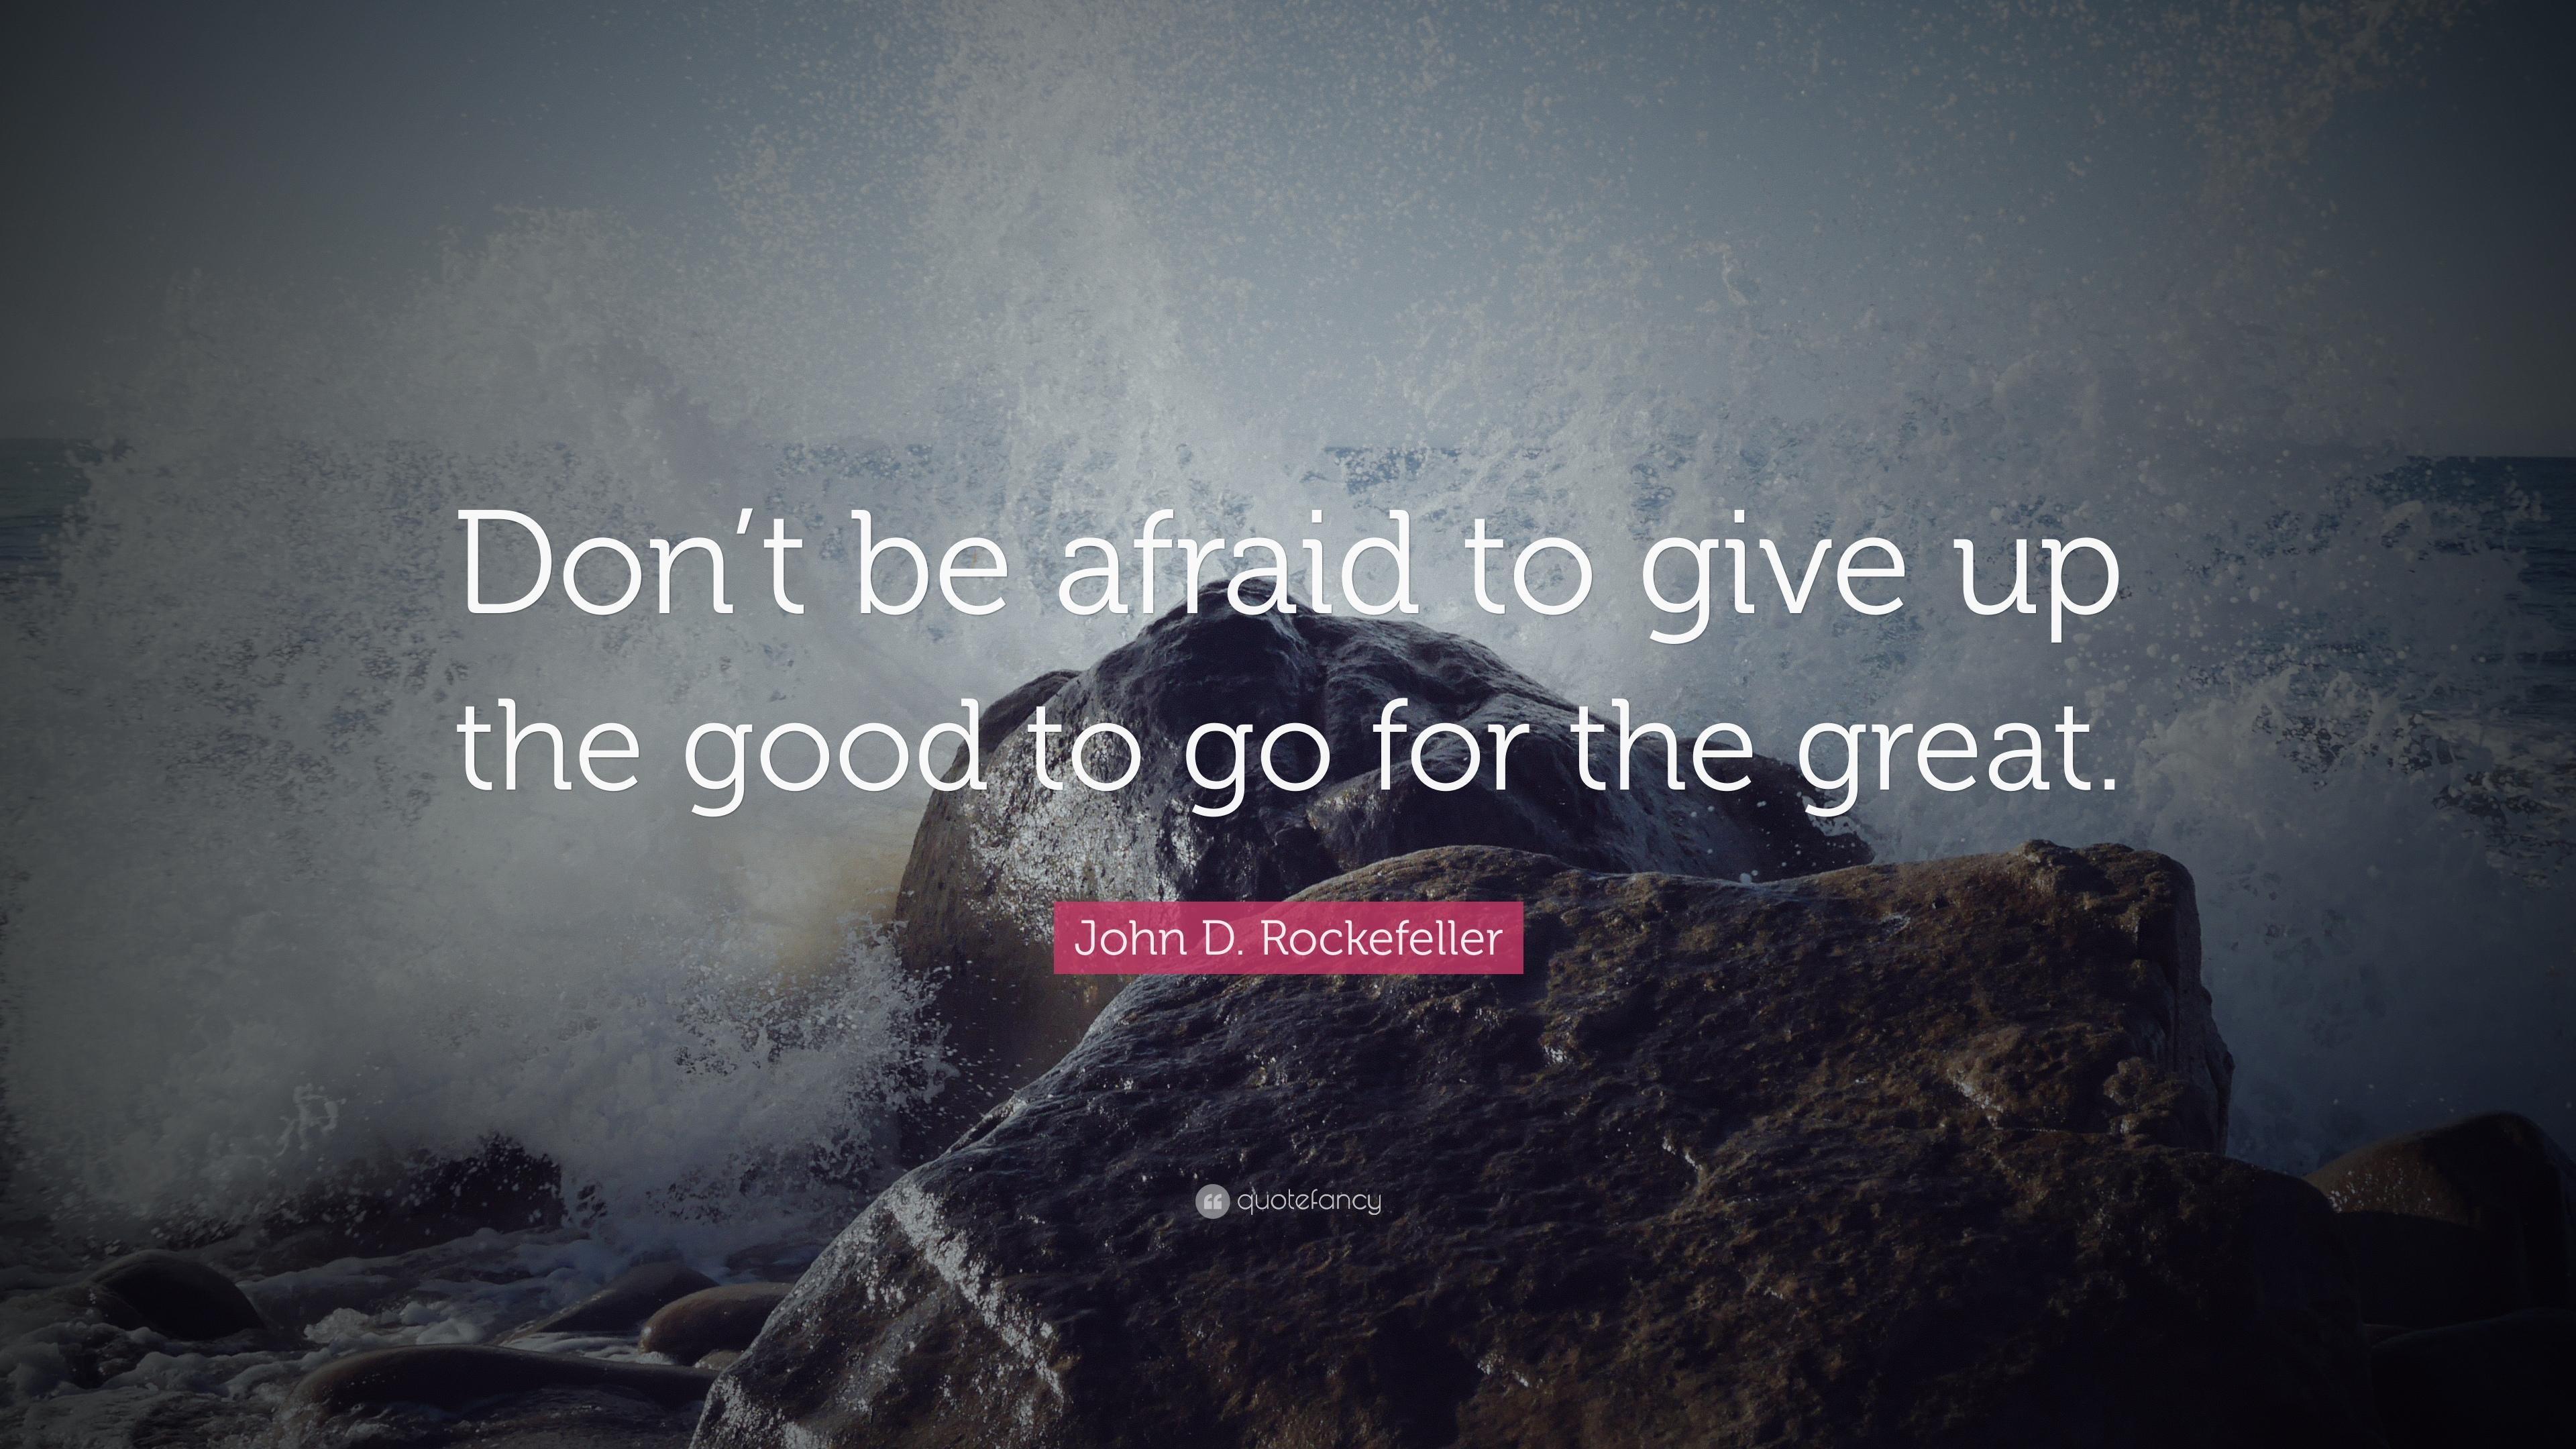 John D. Rockefeller Quote: “Don't be afraid to give up the good to